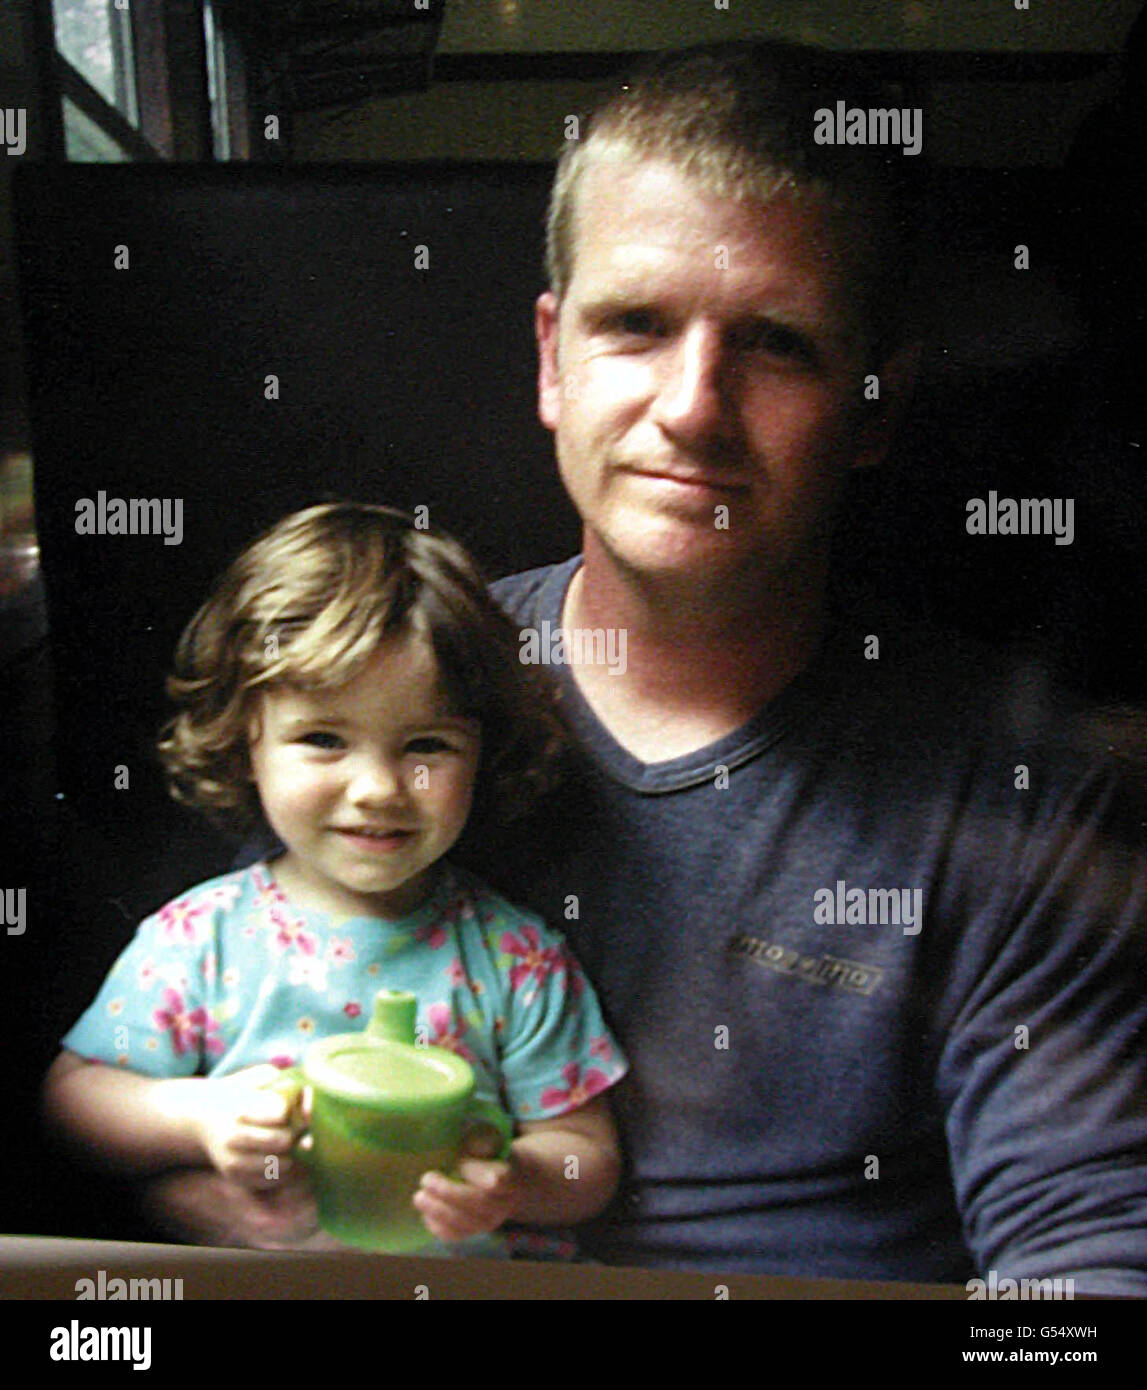 Two-year-old Daniella Hurst and her father Leonard Hurst. Her body, is thought to have been found in woodland at Norton Disney, in the Swinderby area, south of Lincoln in her father's silver Ford Fiesta car. * Detectives were continuing to question the 33-year-old man about the death of a Daniella who had been missing since Sunday. Stock Photo